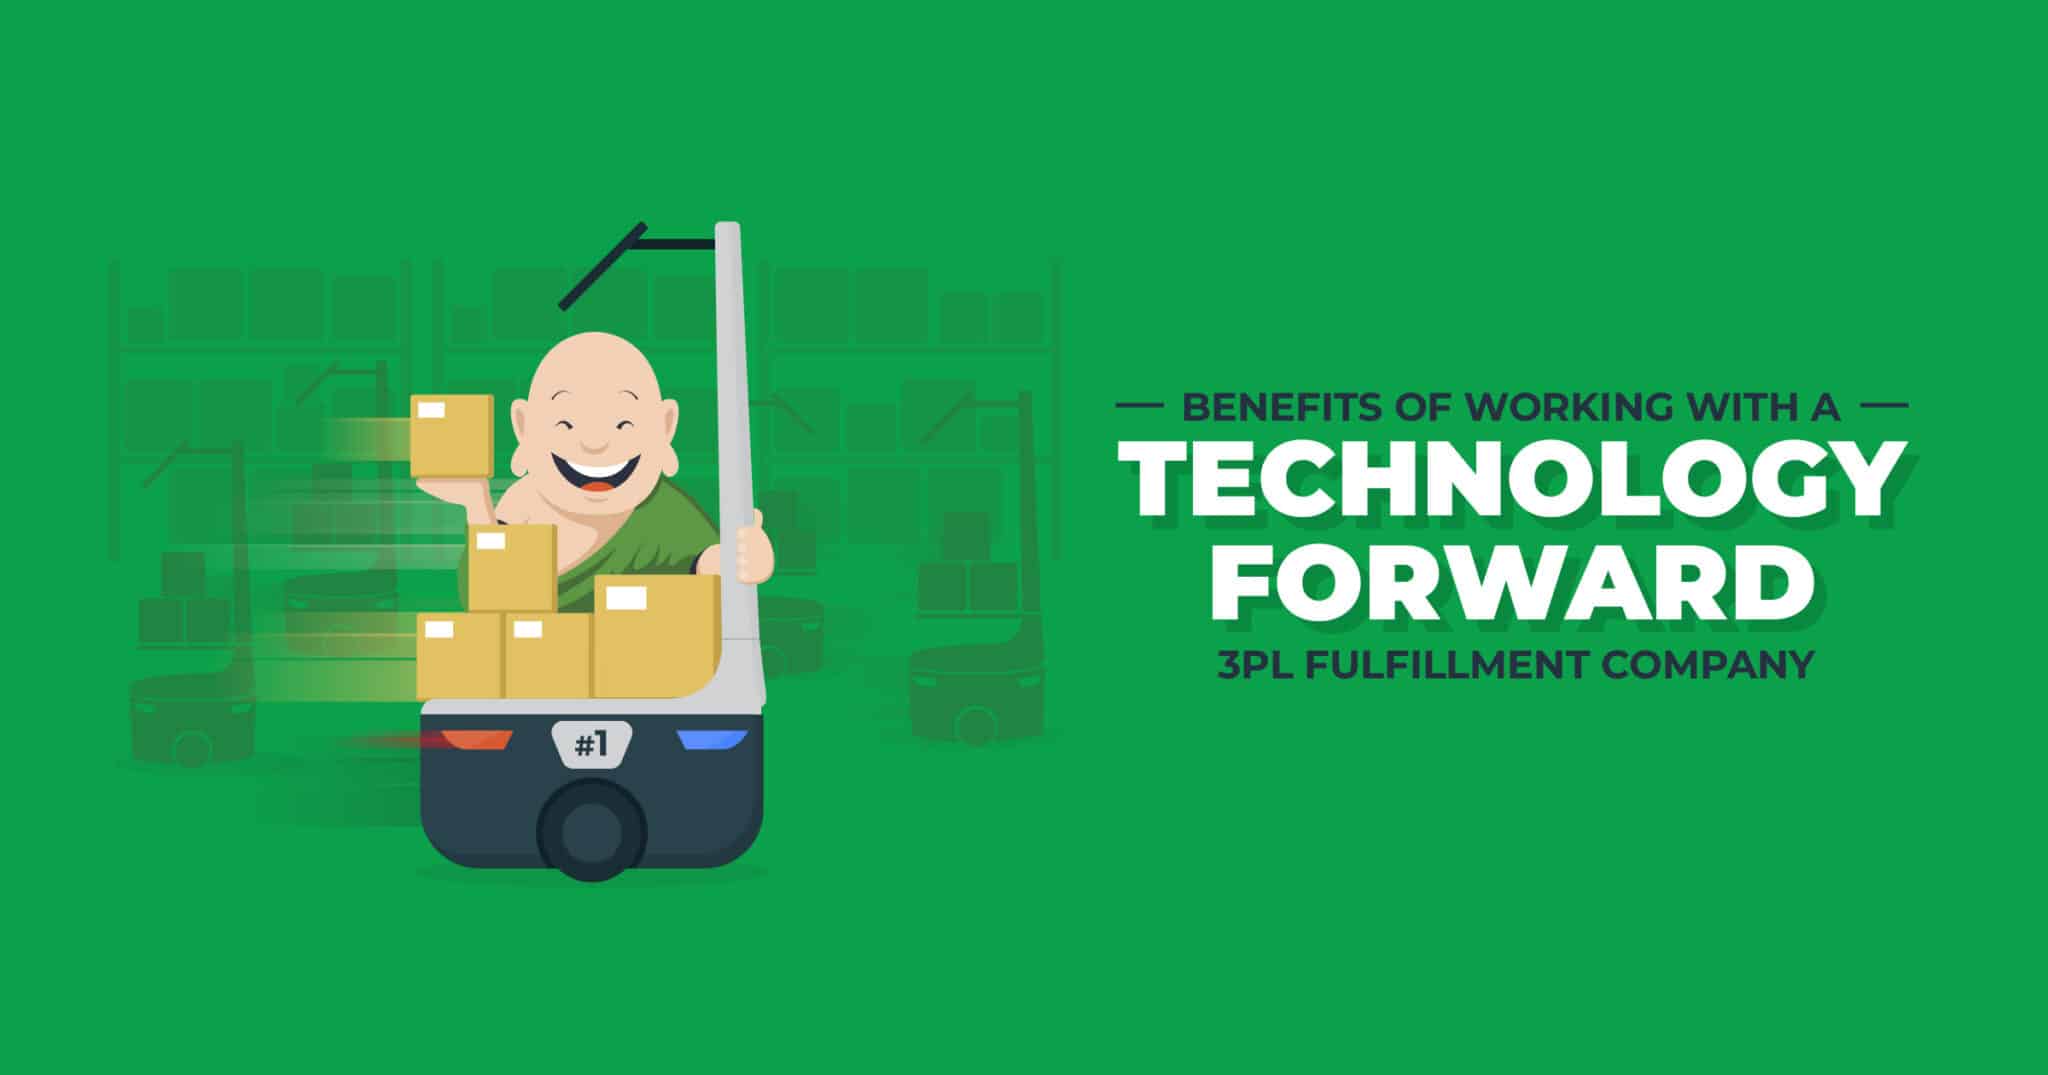 Benefits of Working with a Technology-Forward 3PL Fulfillment Company